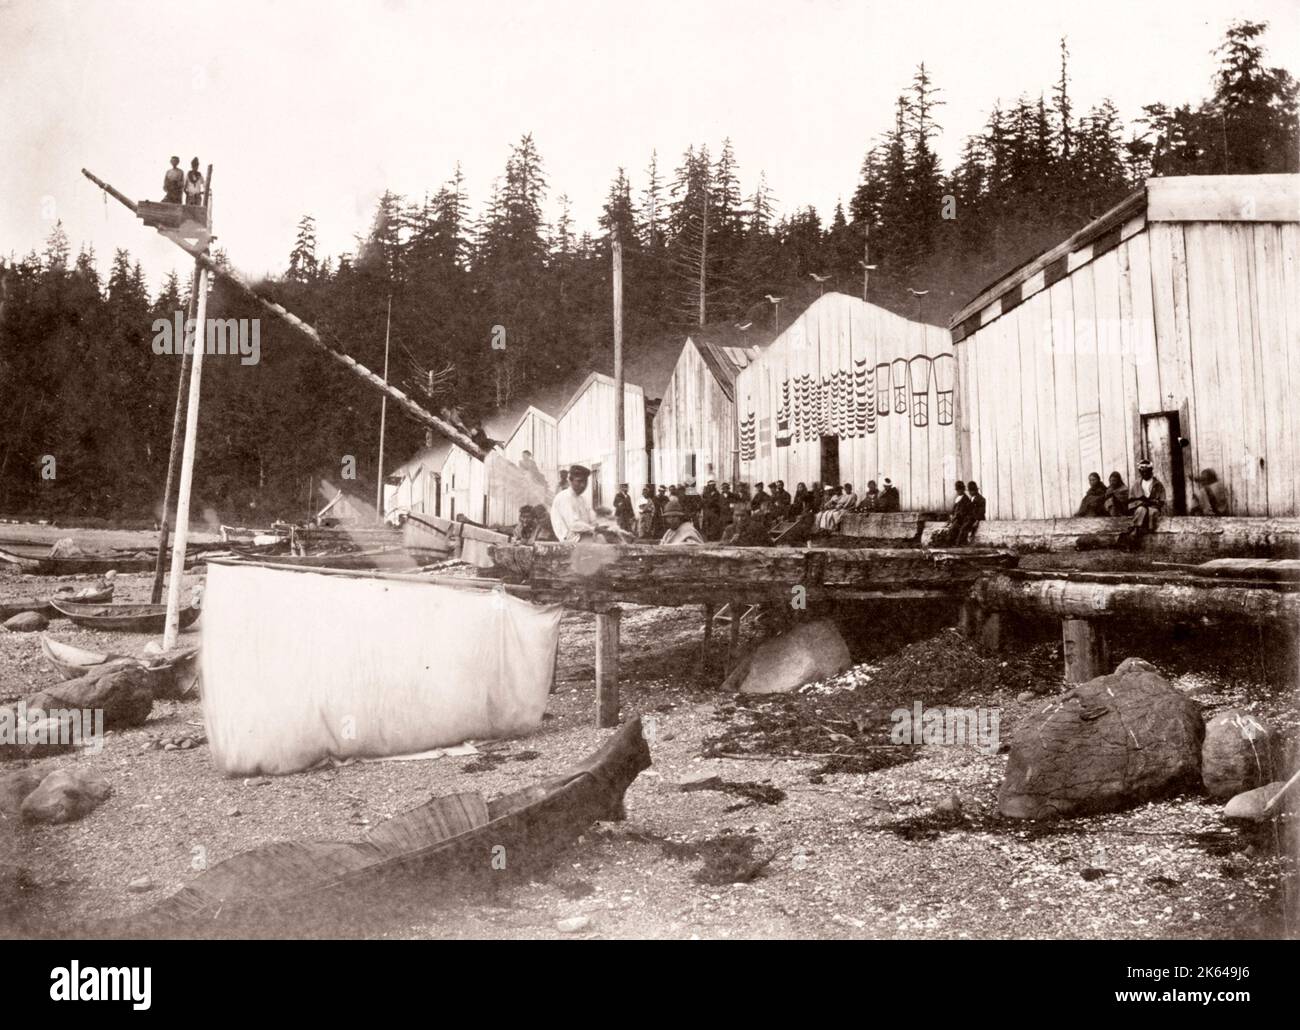 c. 1880s vintage photograph - North America - indigenous village, native American, First Nation, Alert Bay, British Columbia, Canada Stock Photo